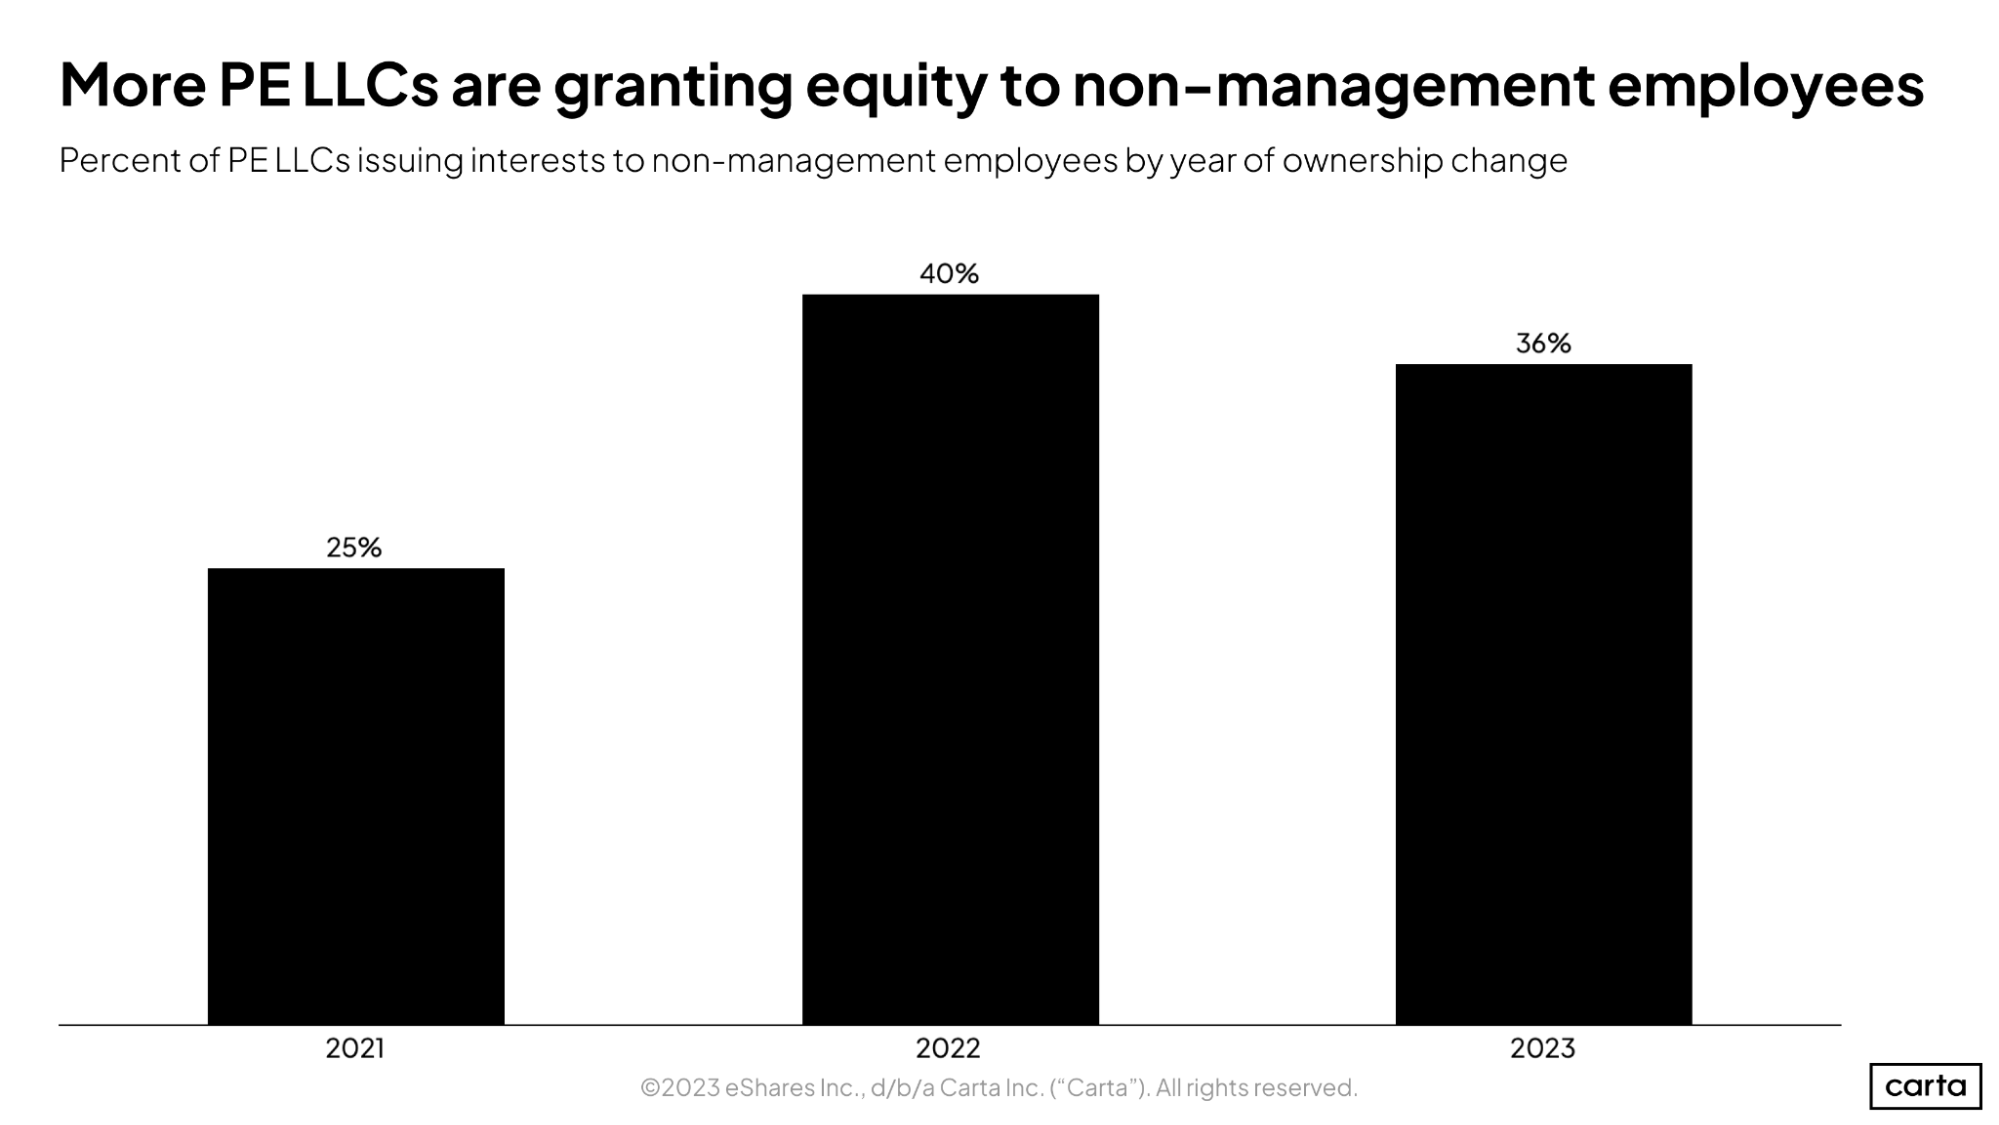 More PELLCs are granting equity to non-management employees